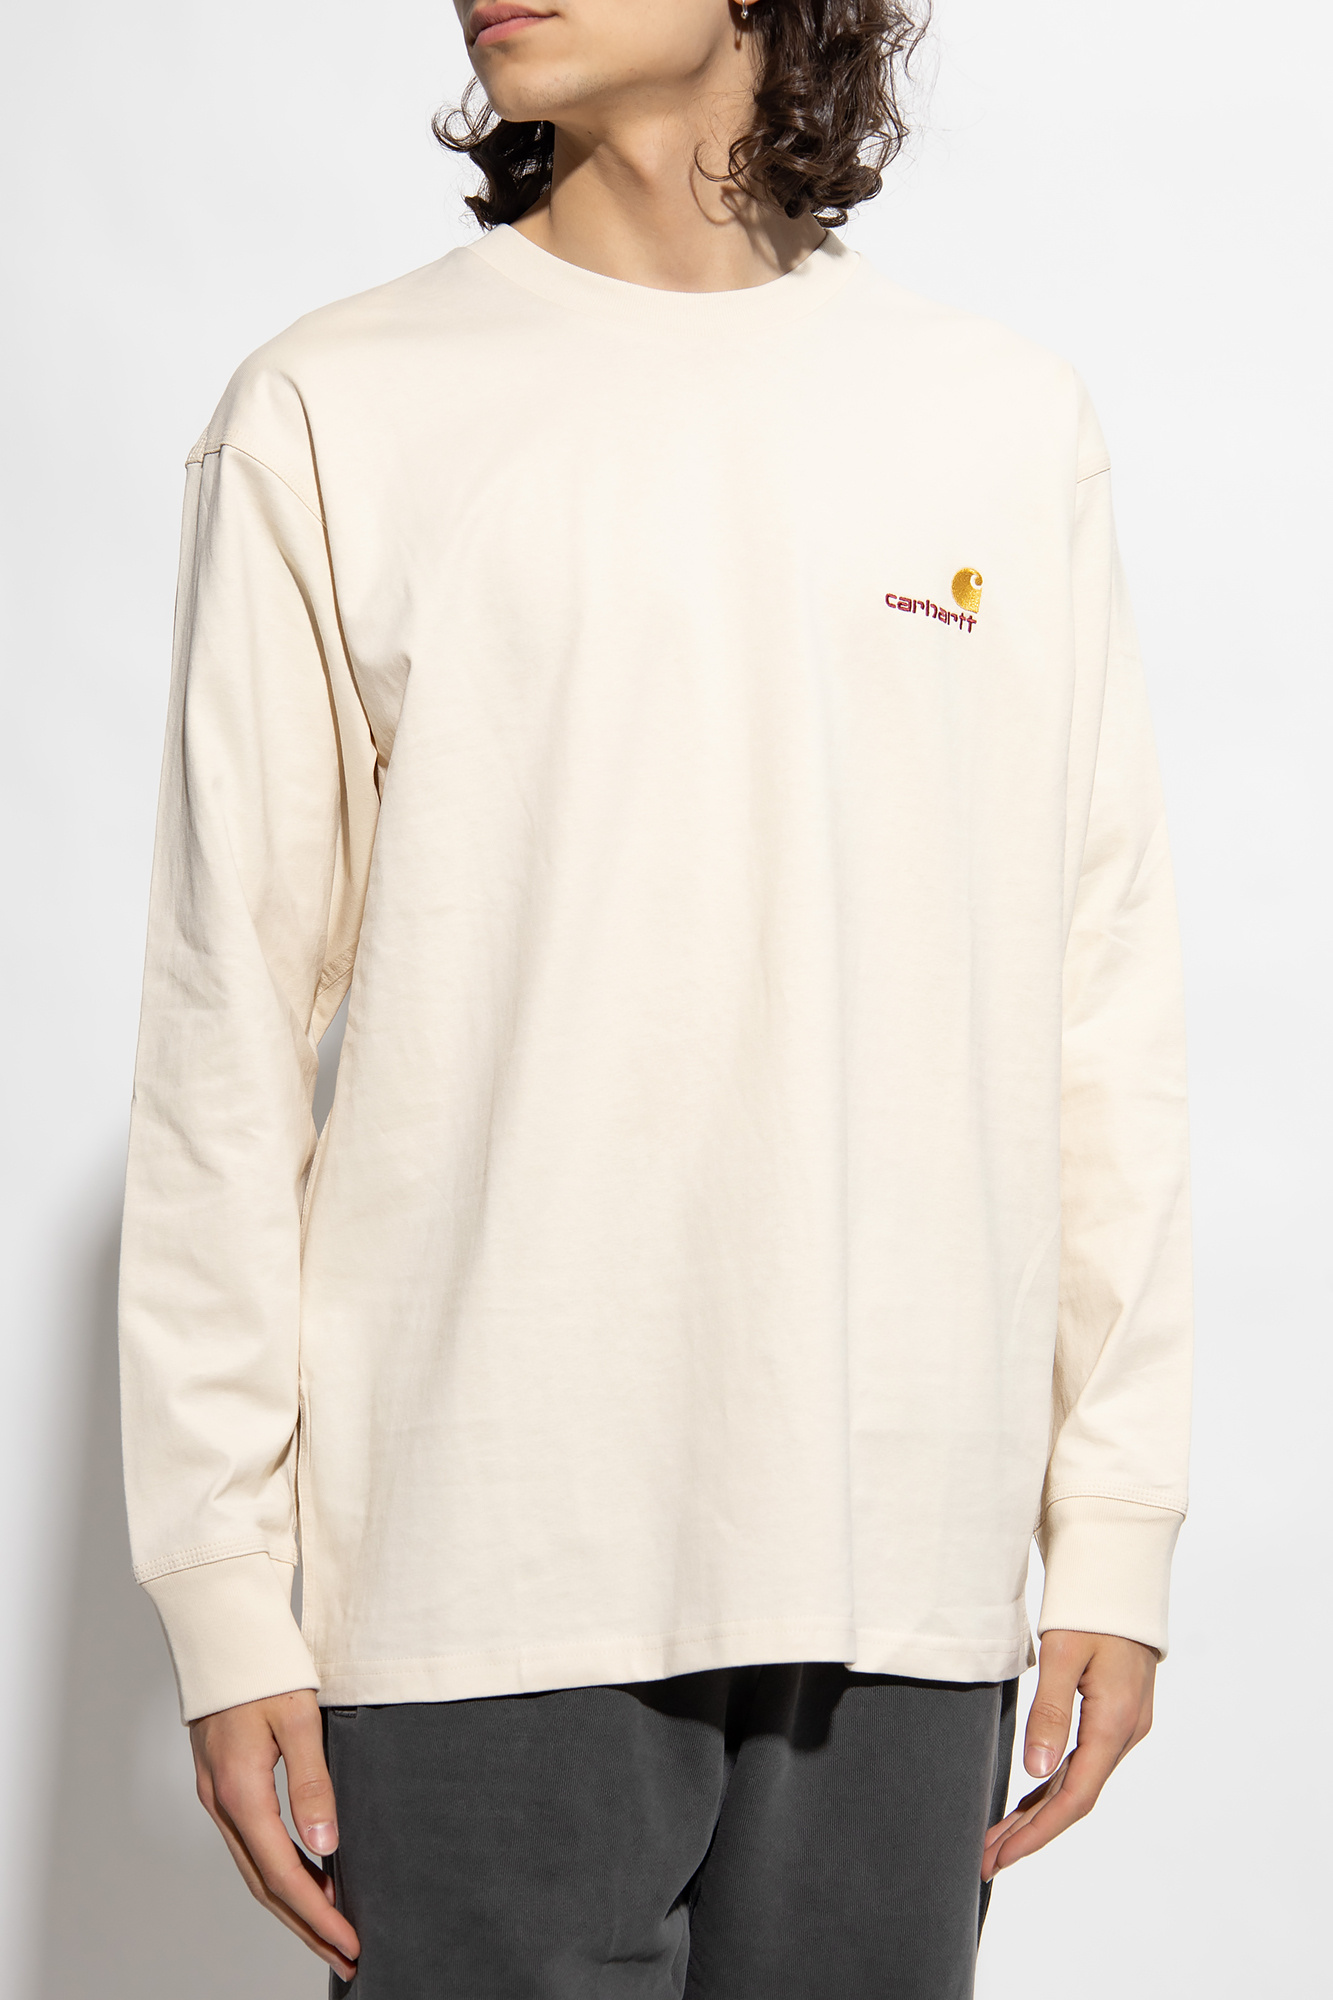 Carhartt WIP T-shirt with logo embroidery